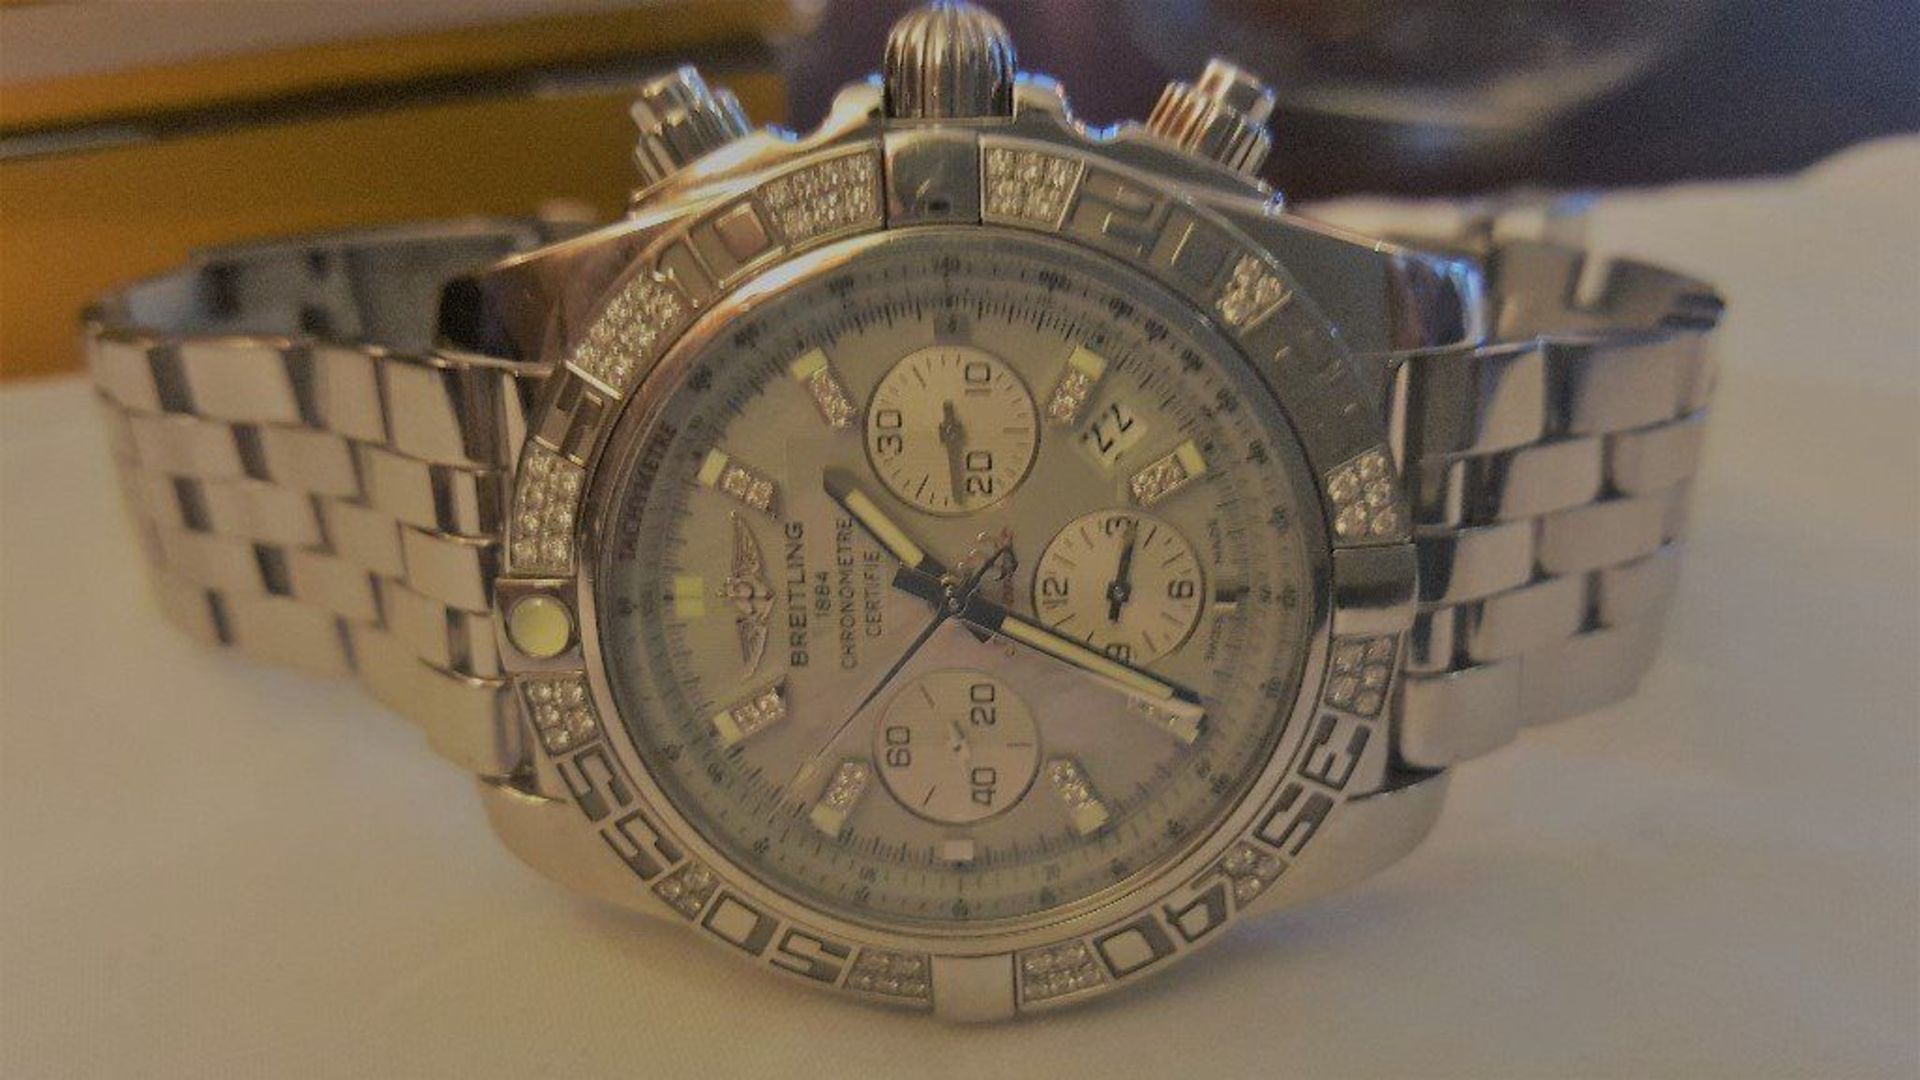 Breitling Chronomat 44 AB0110AA/G686-375A Watch Original Box Certificates Almost New - Image 5 of 9